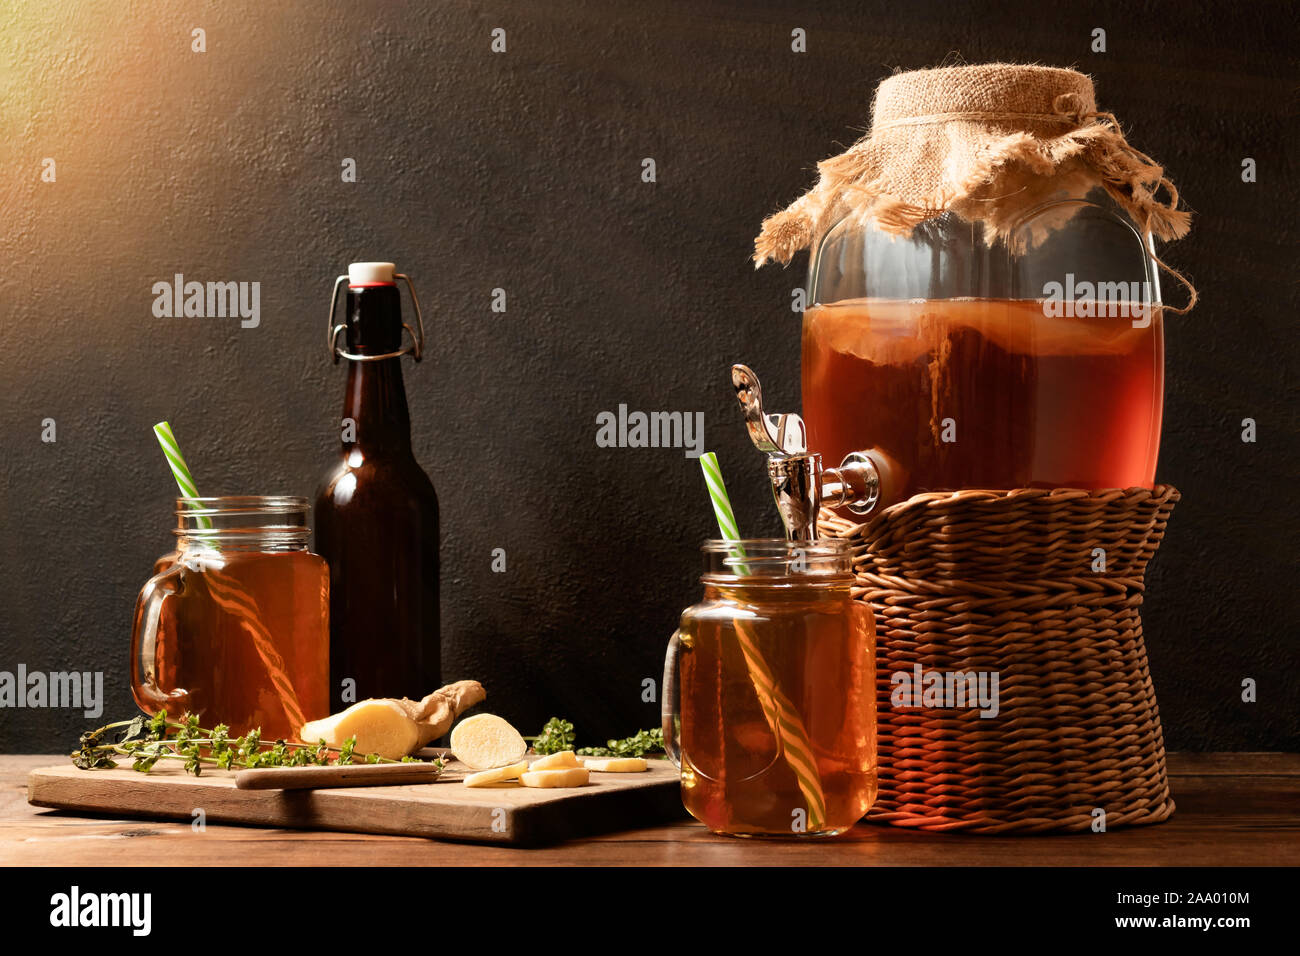 Fresh homemade Kombucha fermented tea drink in jar with faucet and in cans-mugs and bottle on black background. Stock Photo